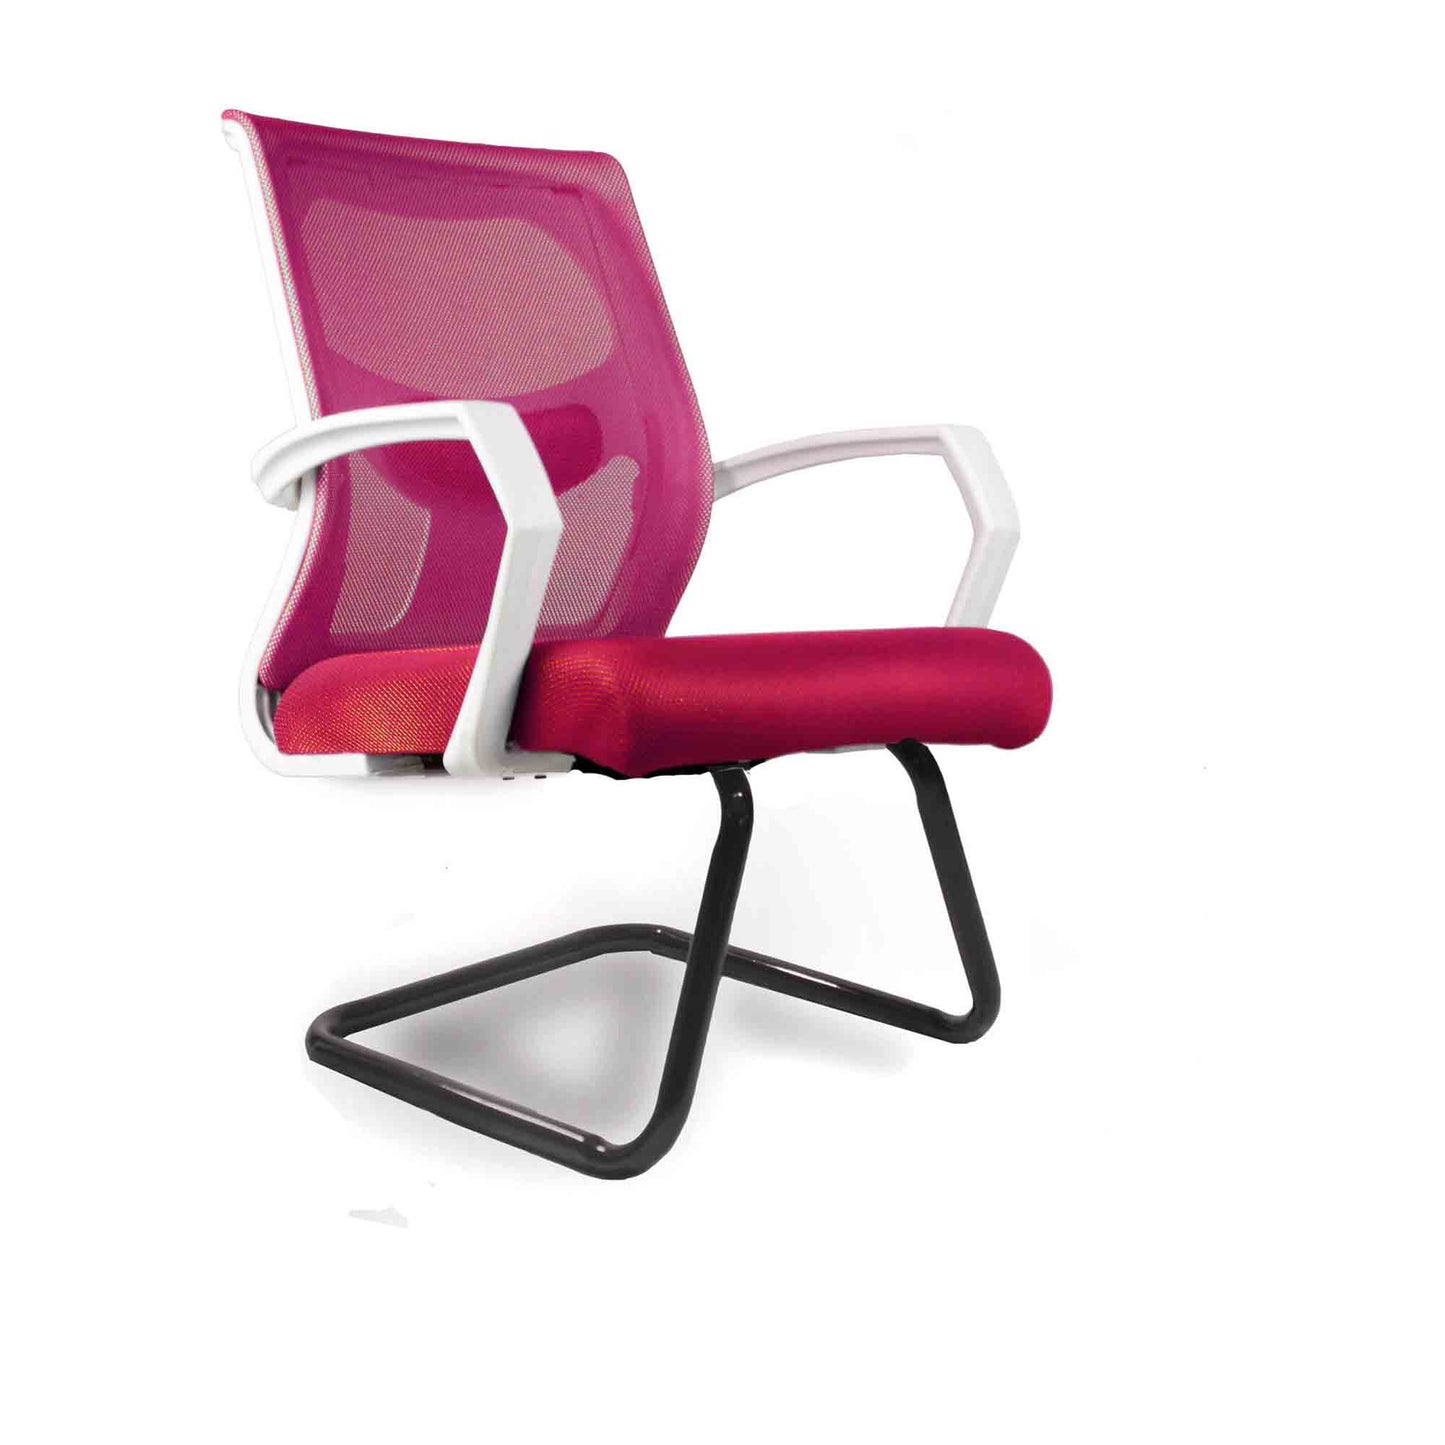 Office Waiting Chair 50*50 CM - White & pink